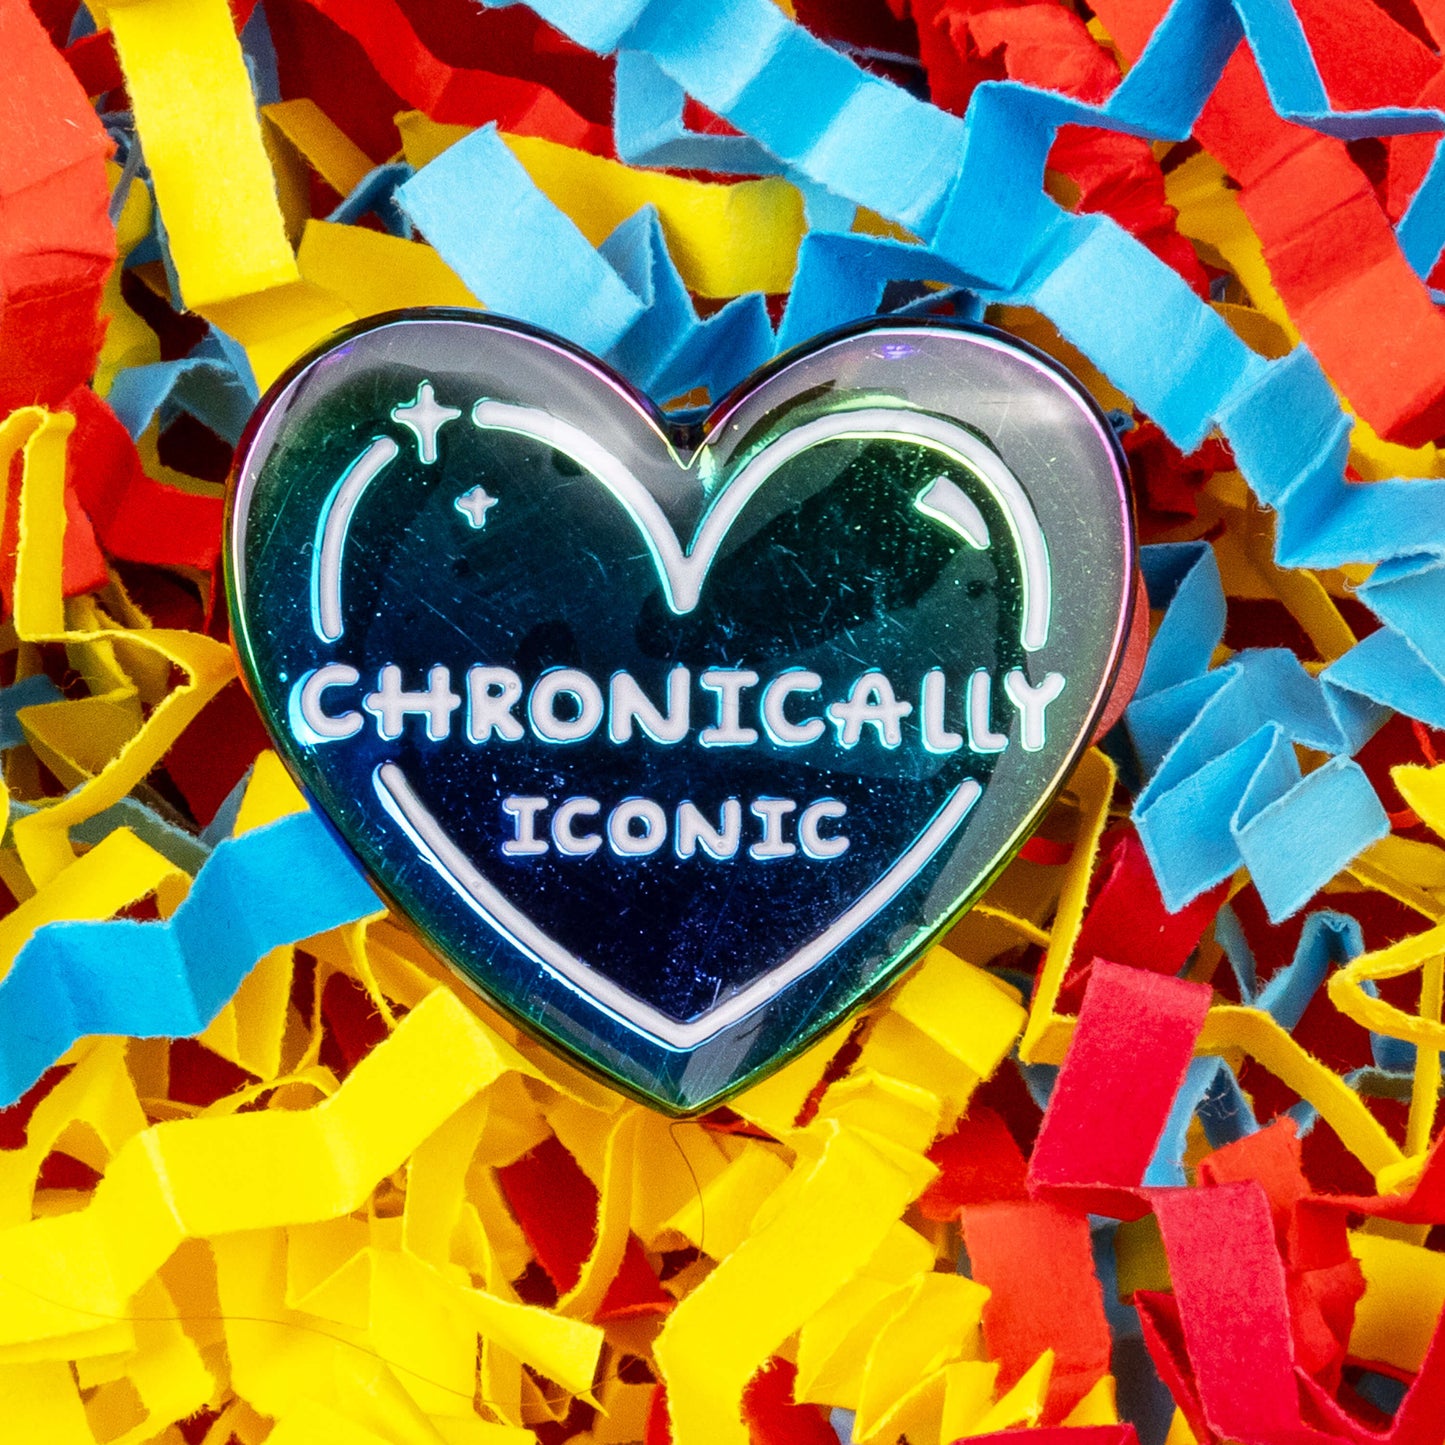 The Chronically Iconic Enamel Pin on a red, blue and yellow card confetti  background. The anodised rainbow heart shaped pin has a white outline with sparkles and text reading 'chronically iconic'. The design was created to raise awareness for chronic illness and invisible illness.